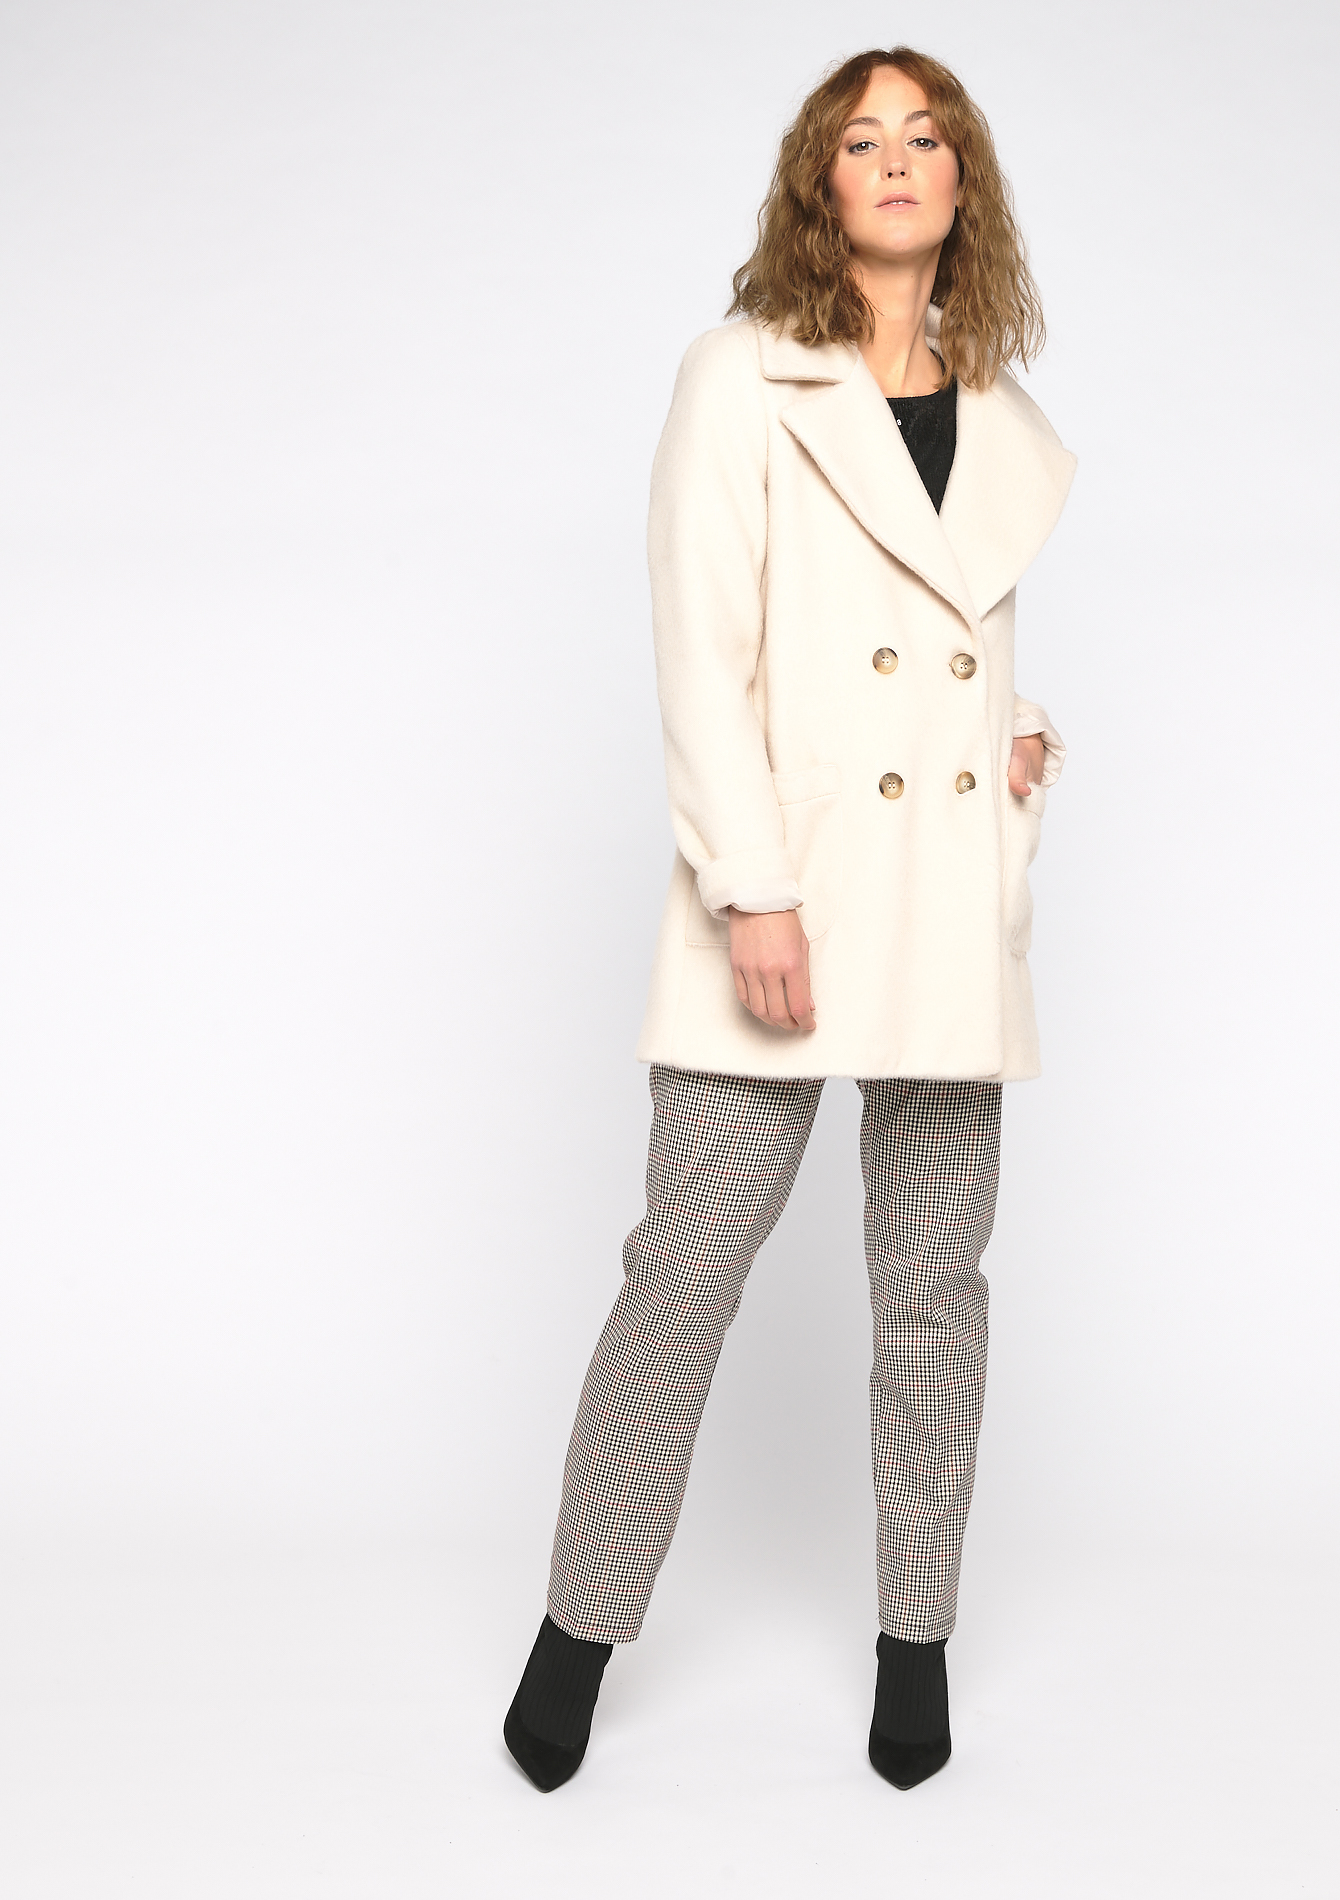 Long coat with wide collar and buttons - IVORY CREAM - 23000198_1049